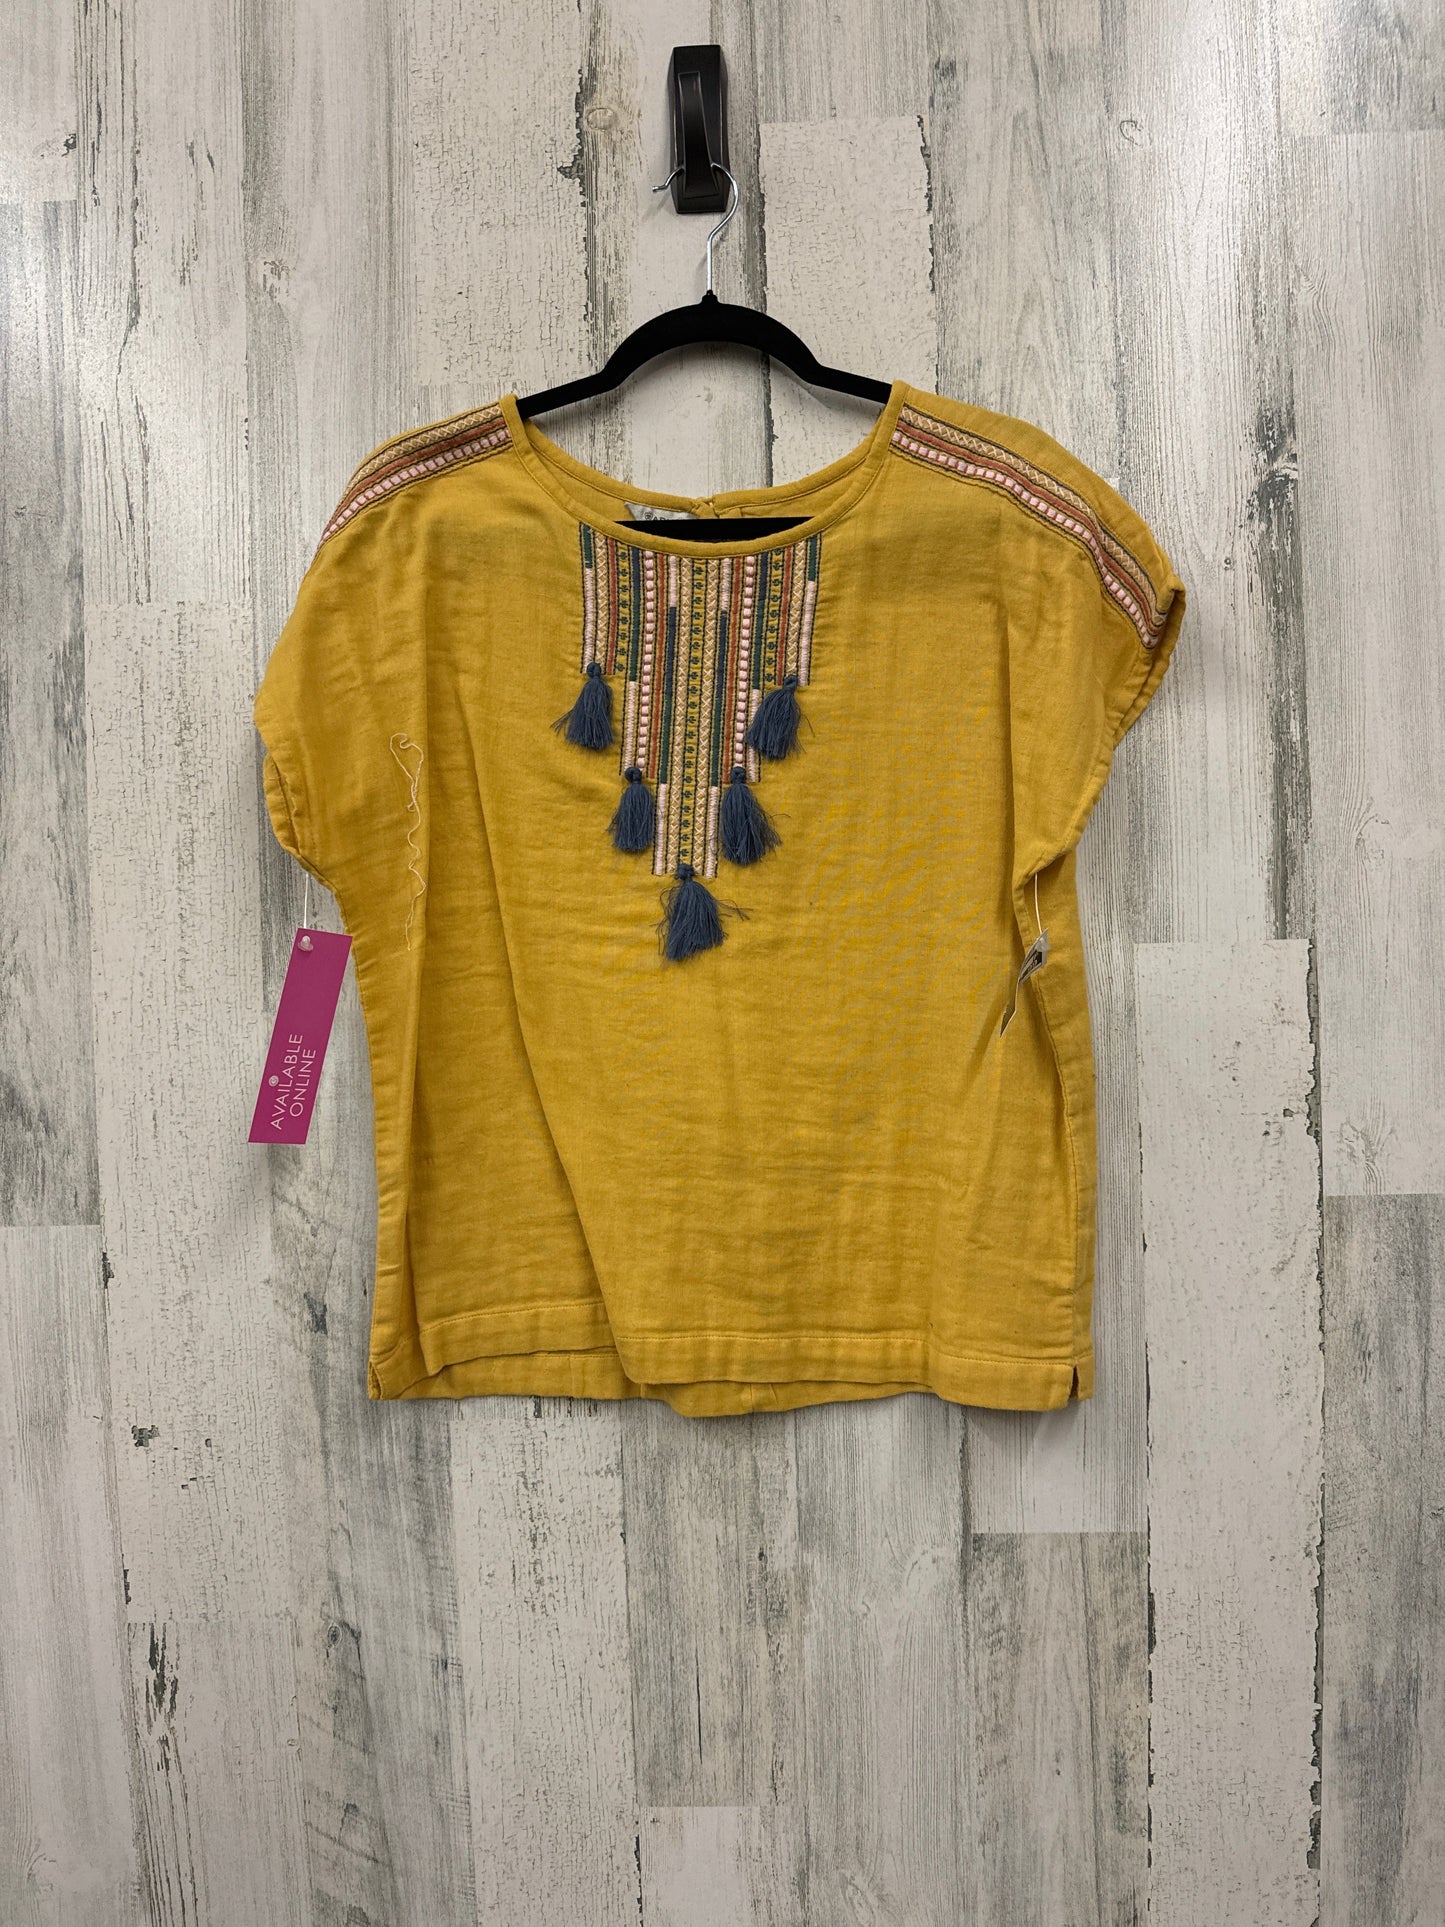 Yellow Top Short Sleeve Ariat, Size M